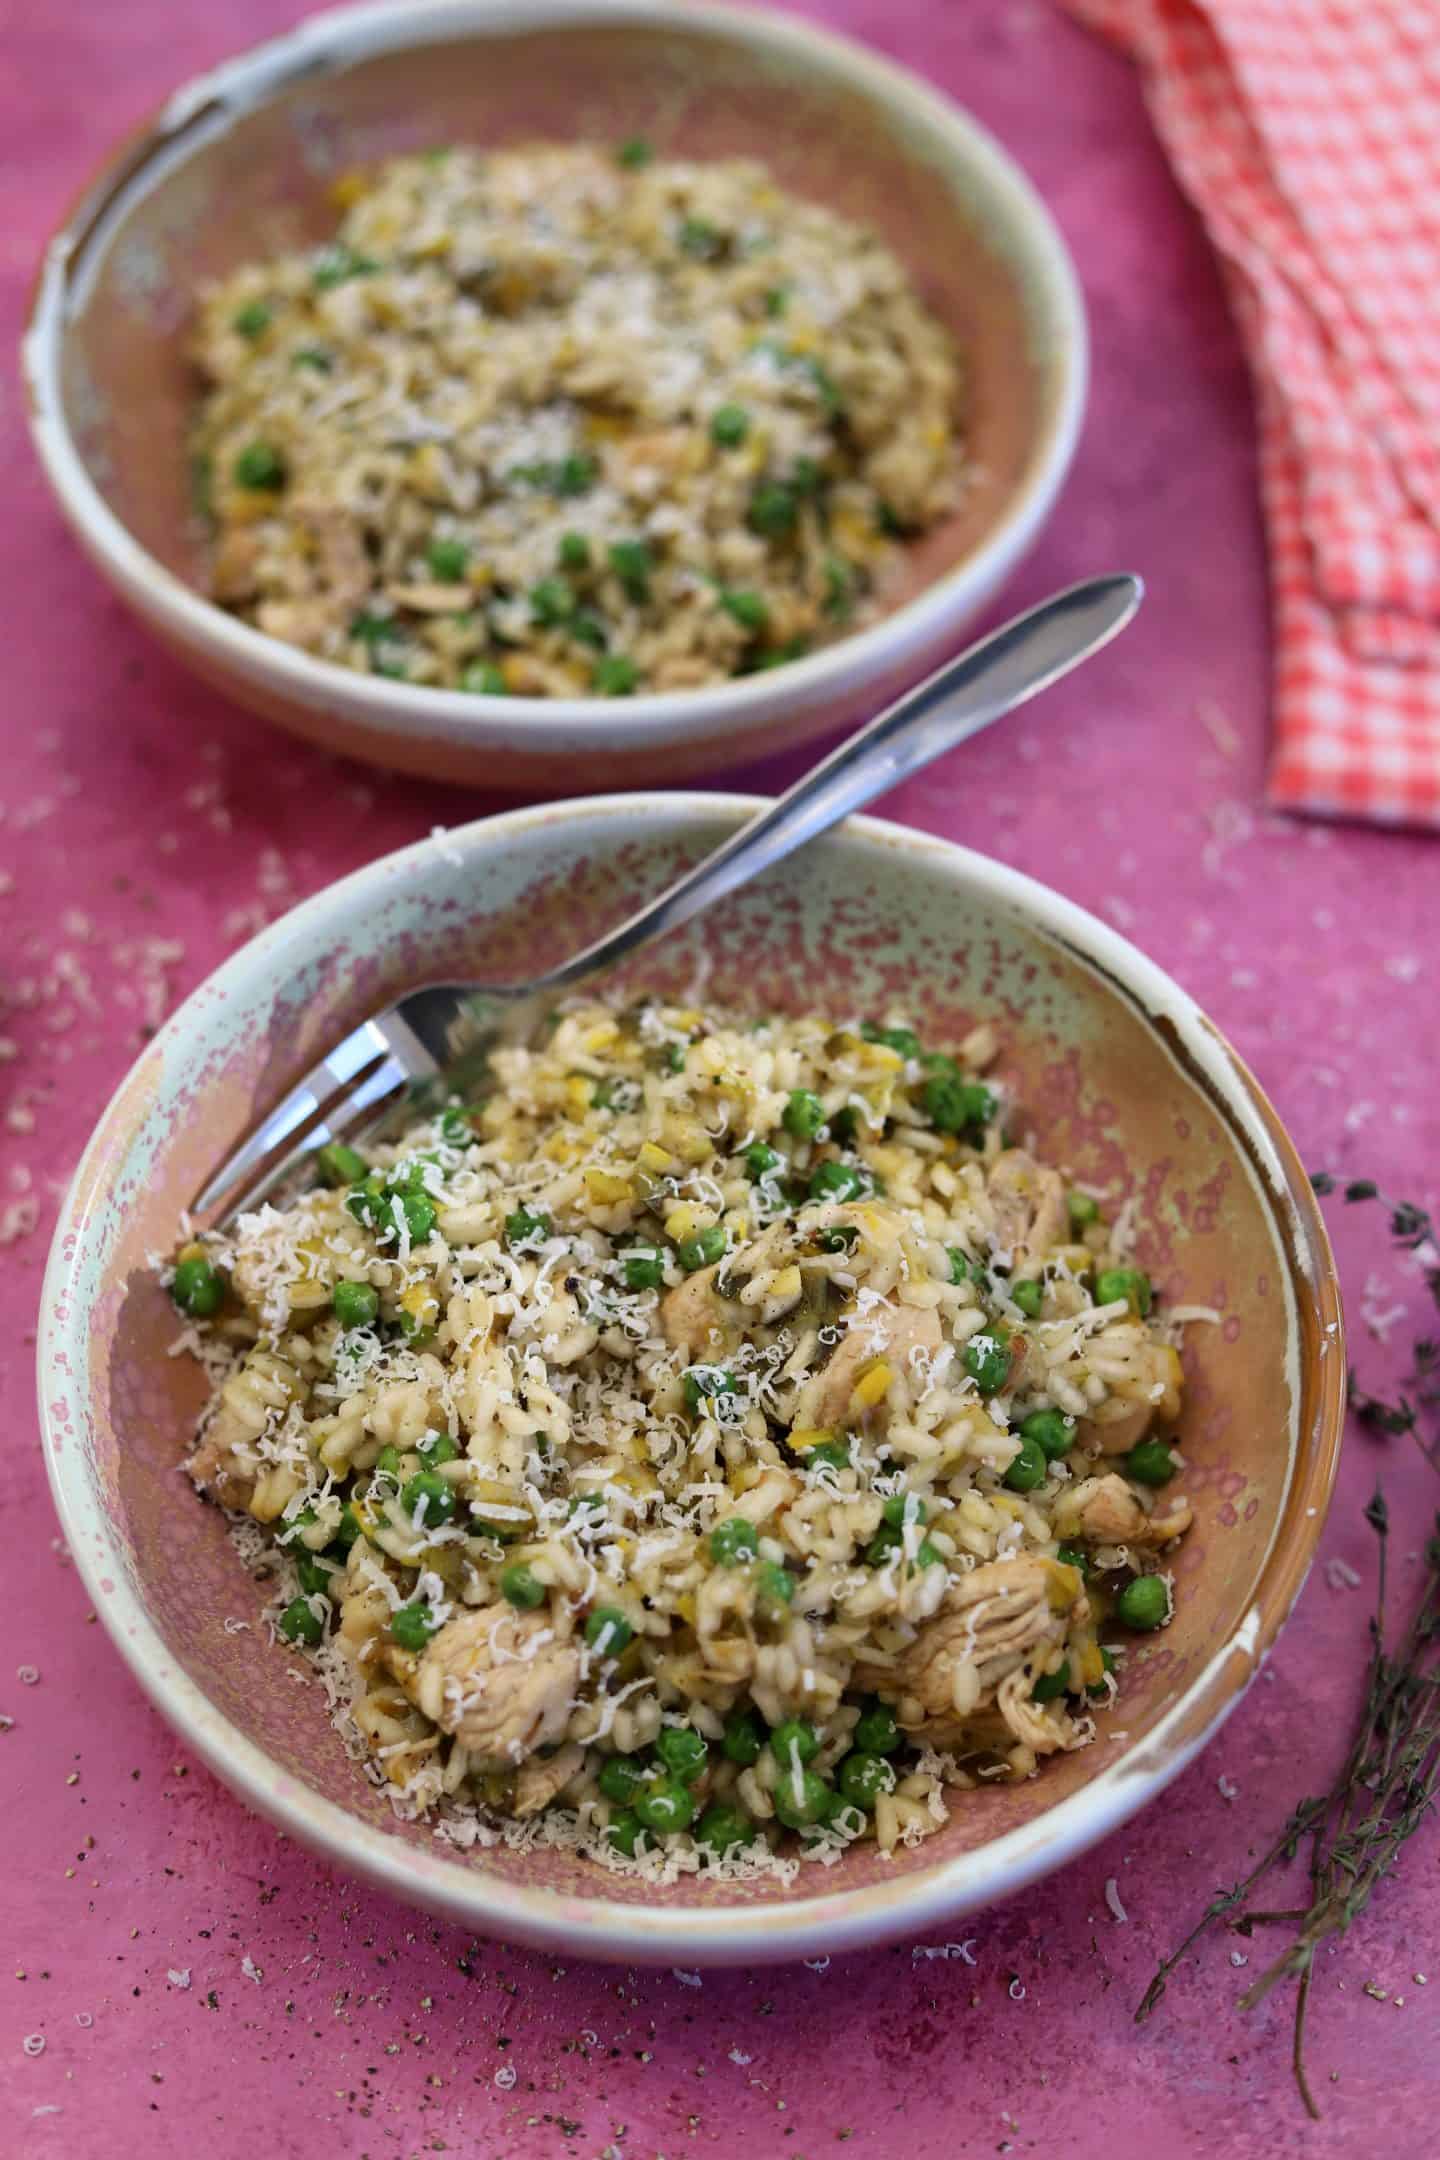 chicken and leek risotto